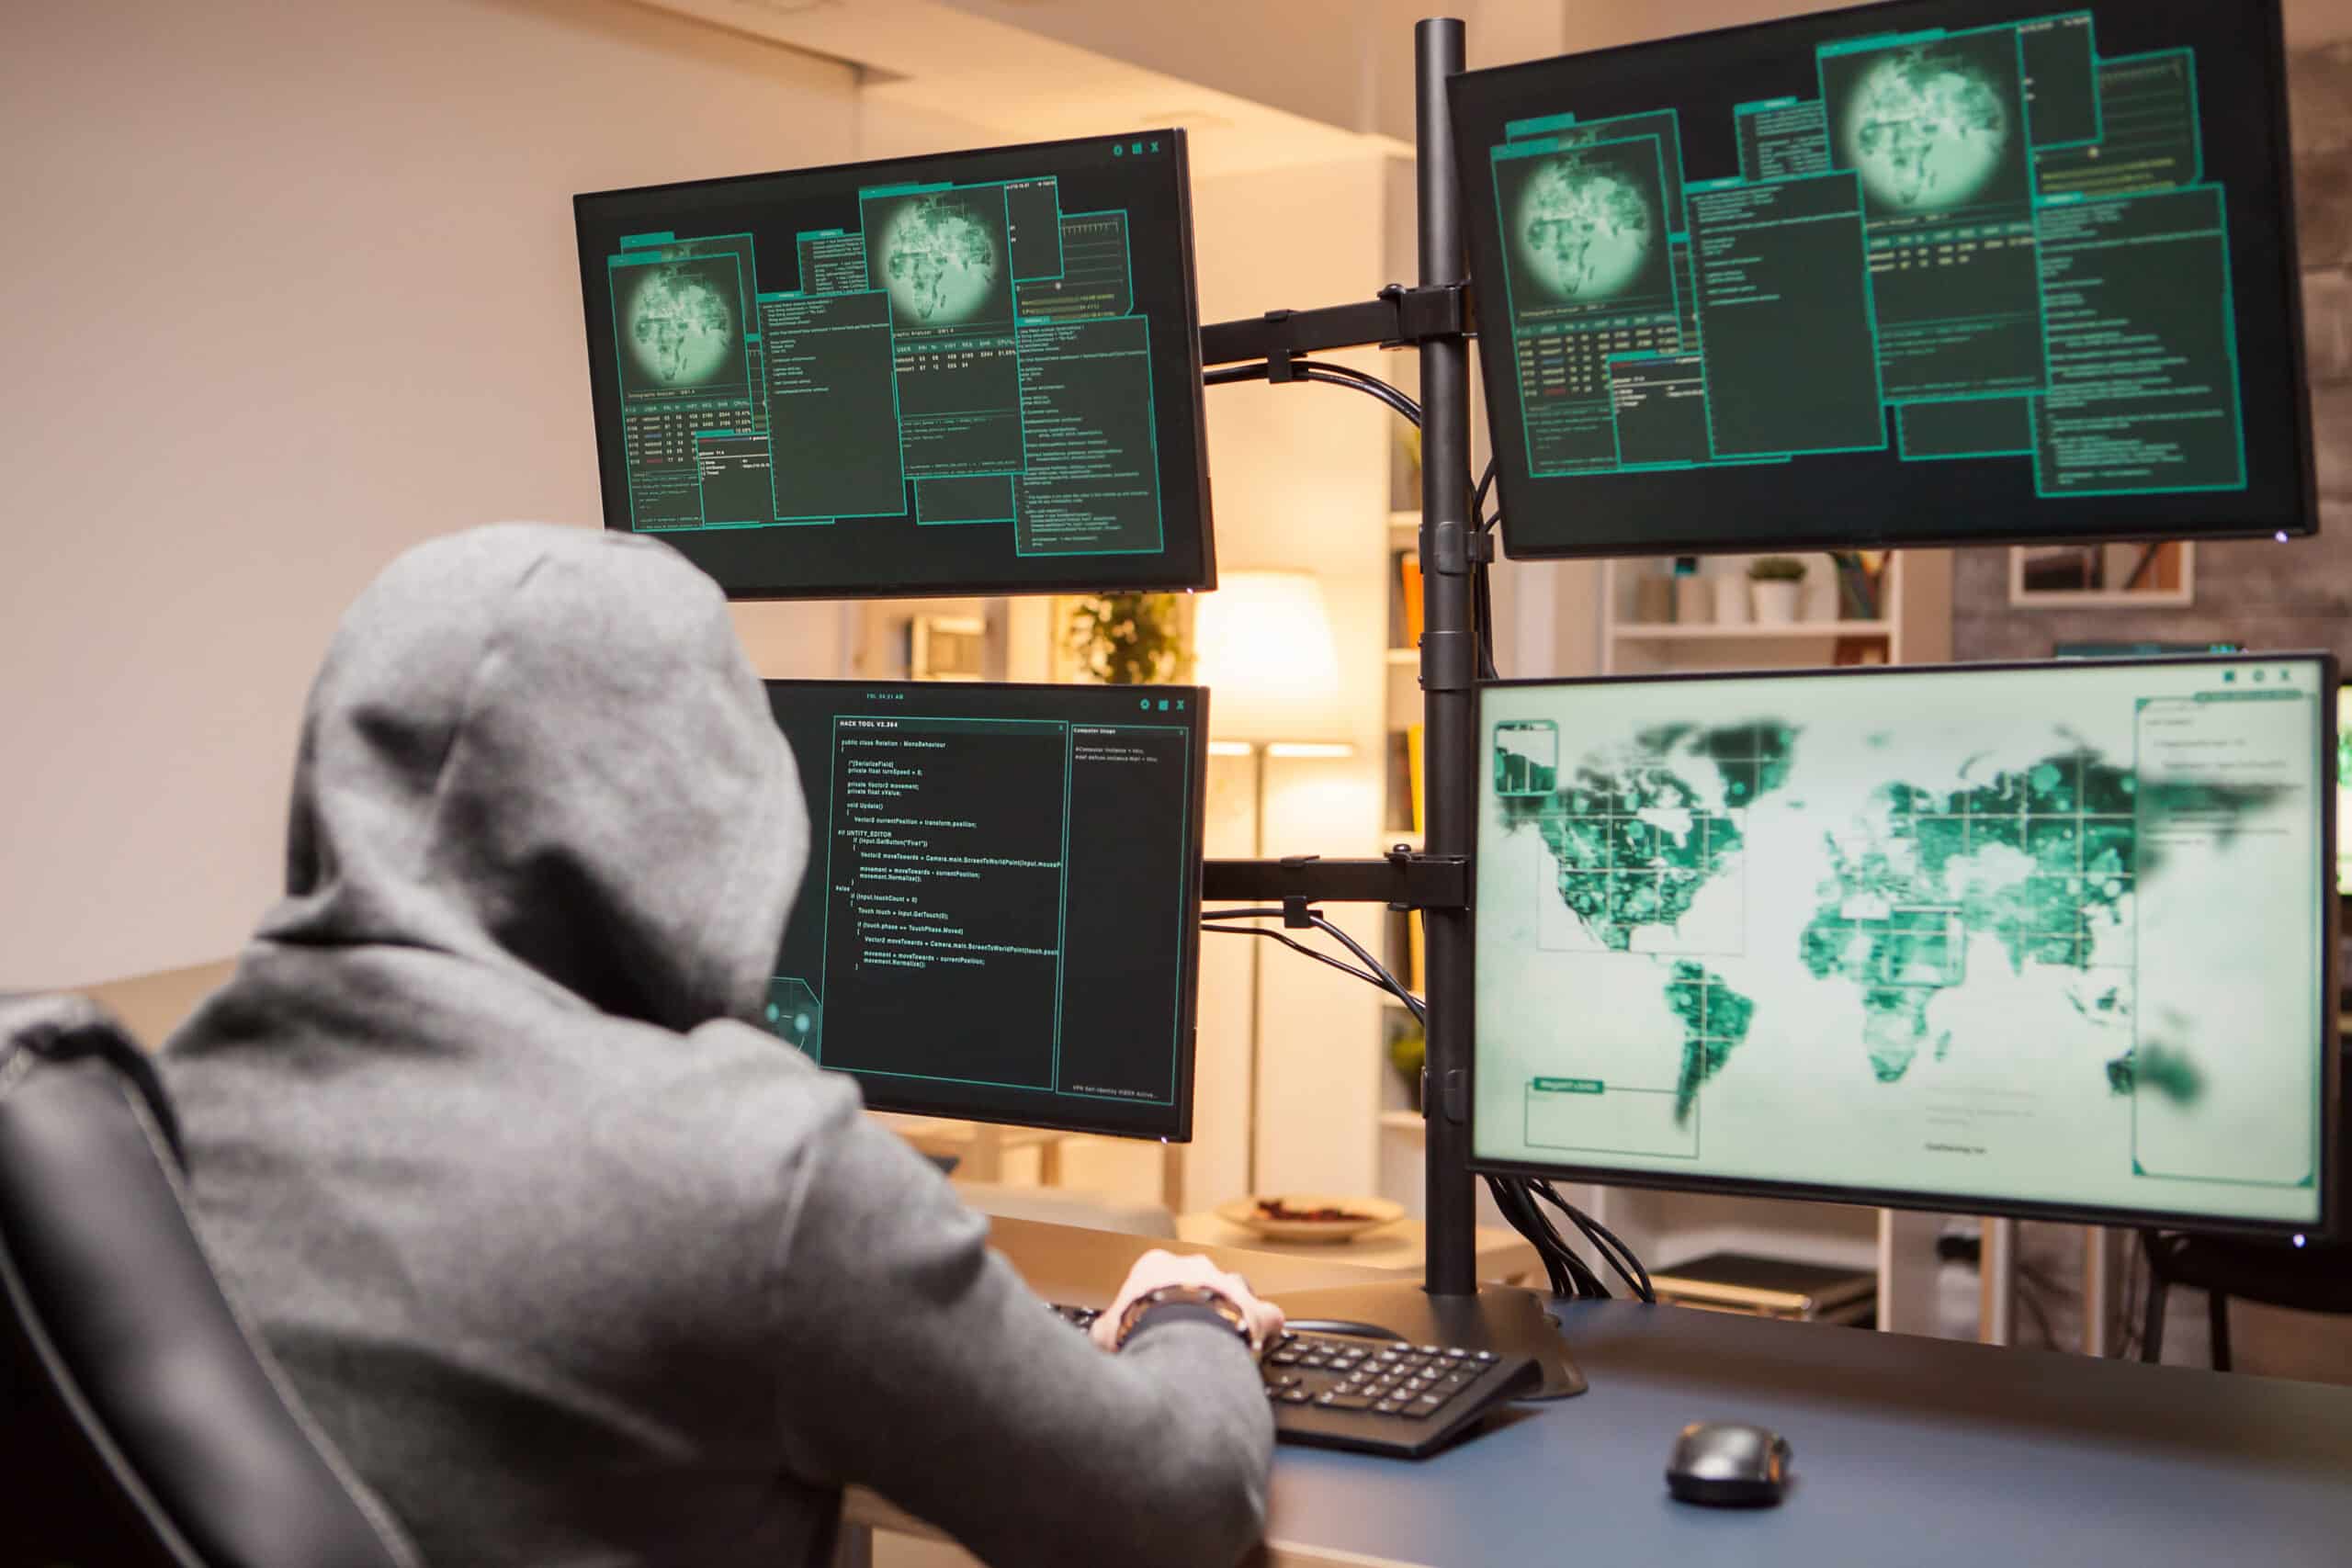 Dangerous hacker wearing a hoodie while planting a malware from computer with multiple screens.